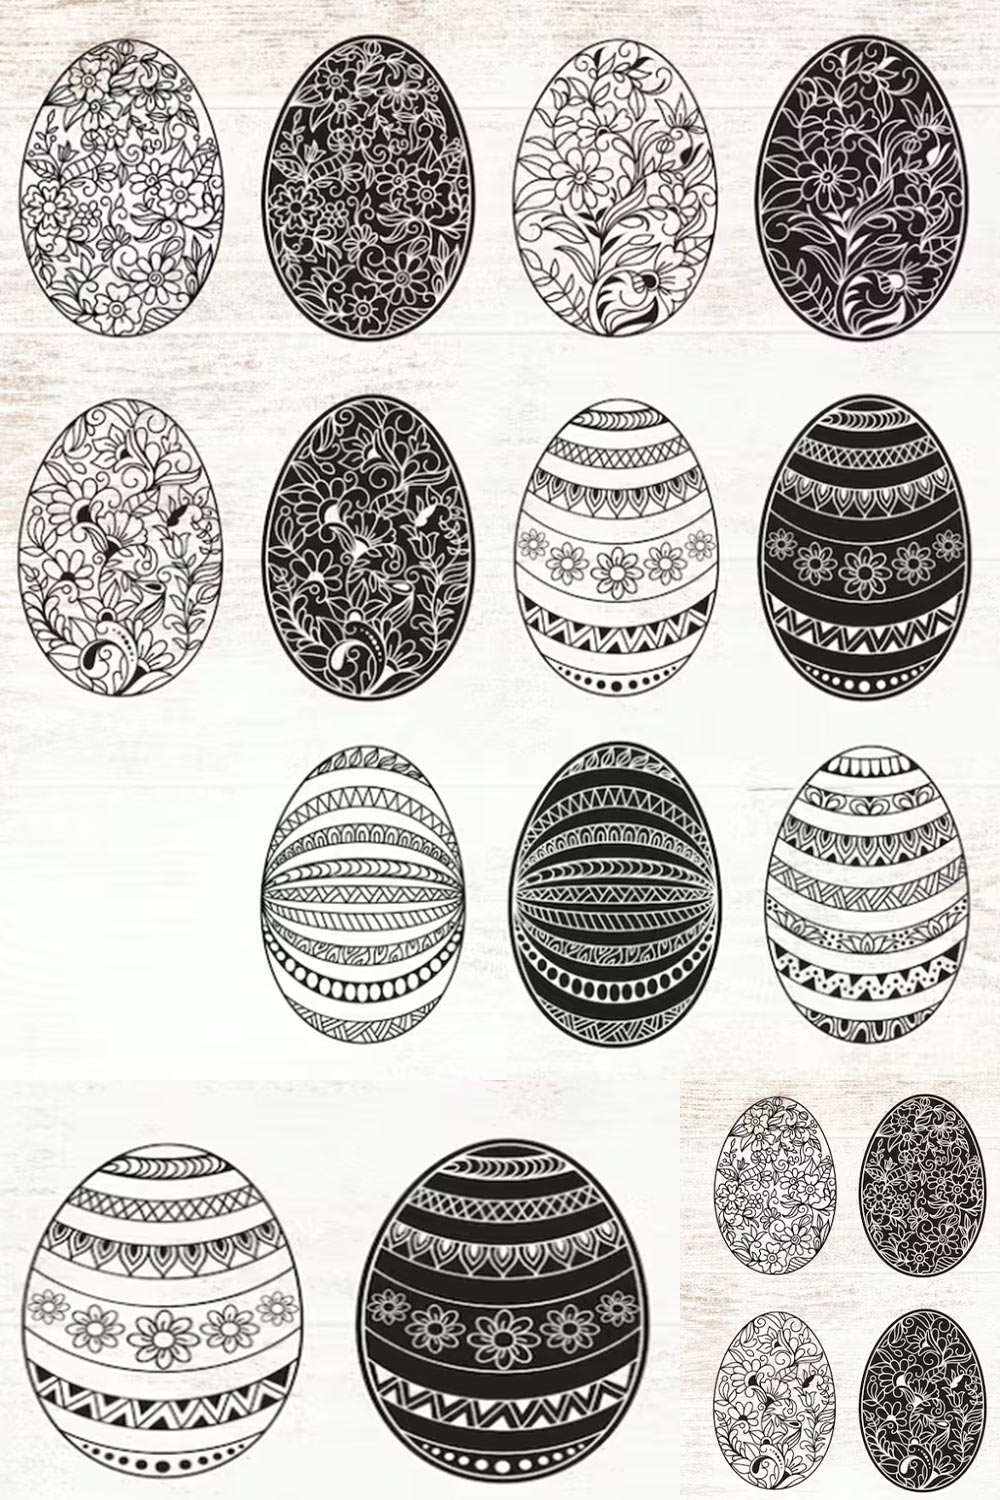 Collage of eggs with different ornaments in black and white.